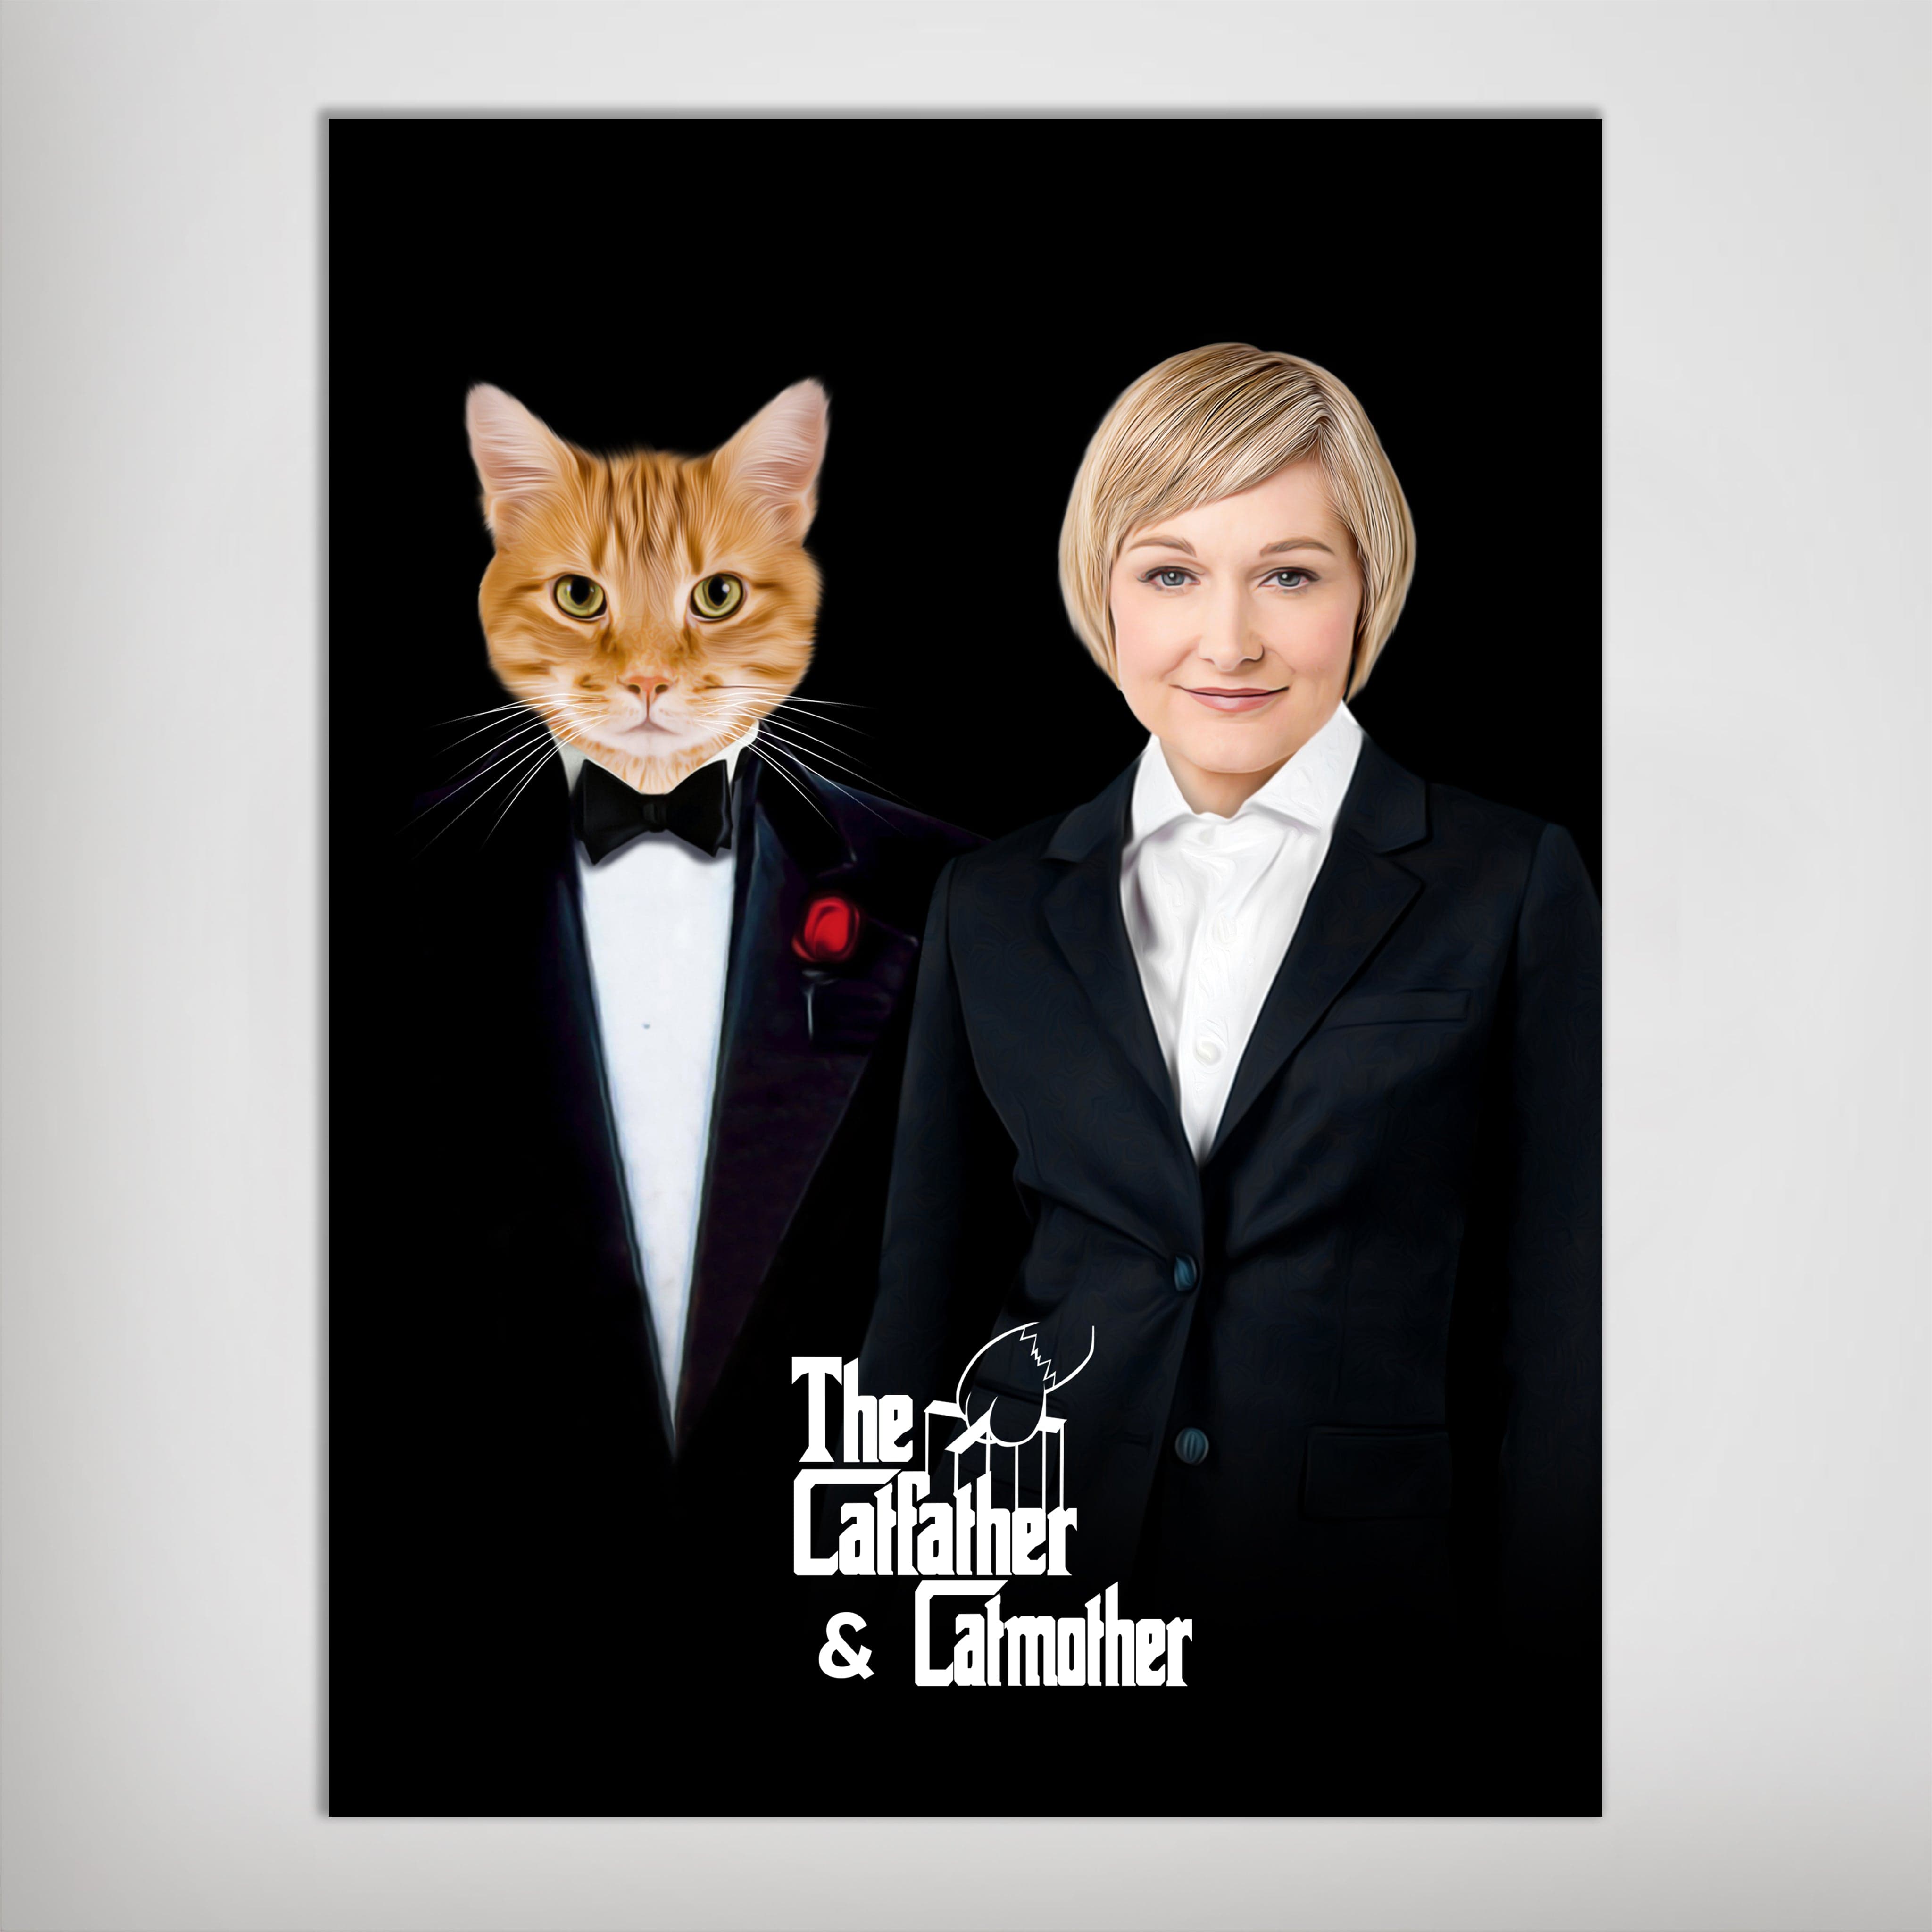 &#39;The Catfather &amp; Catmother&#39; Personalized Poster